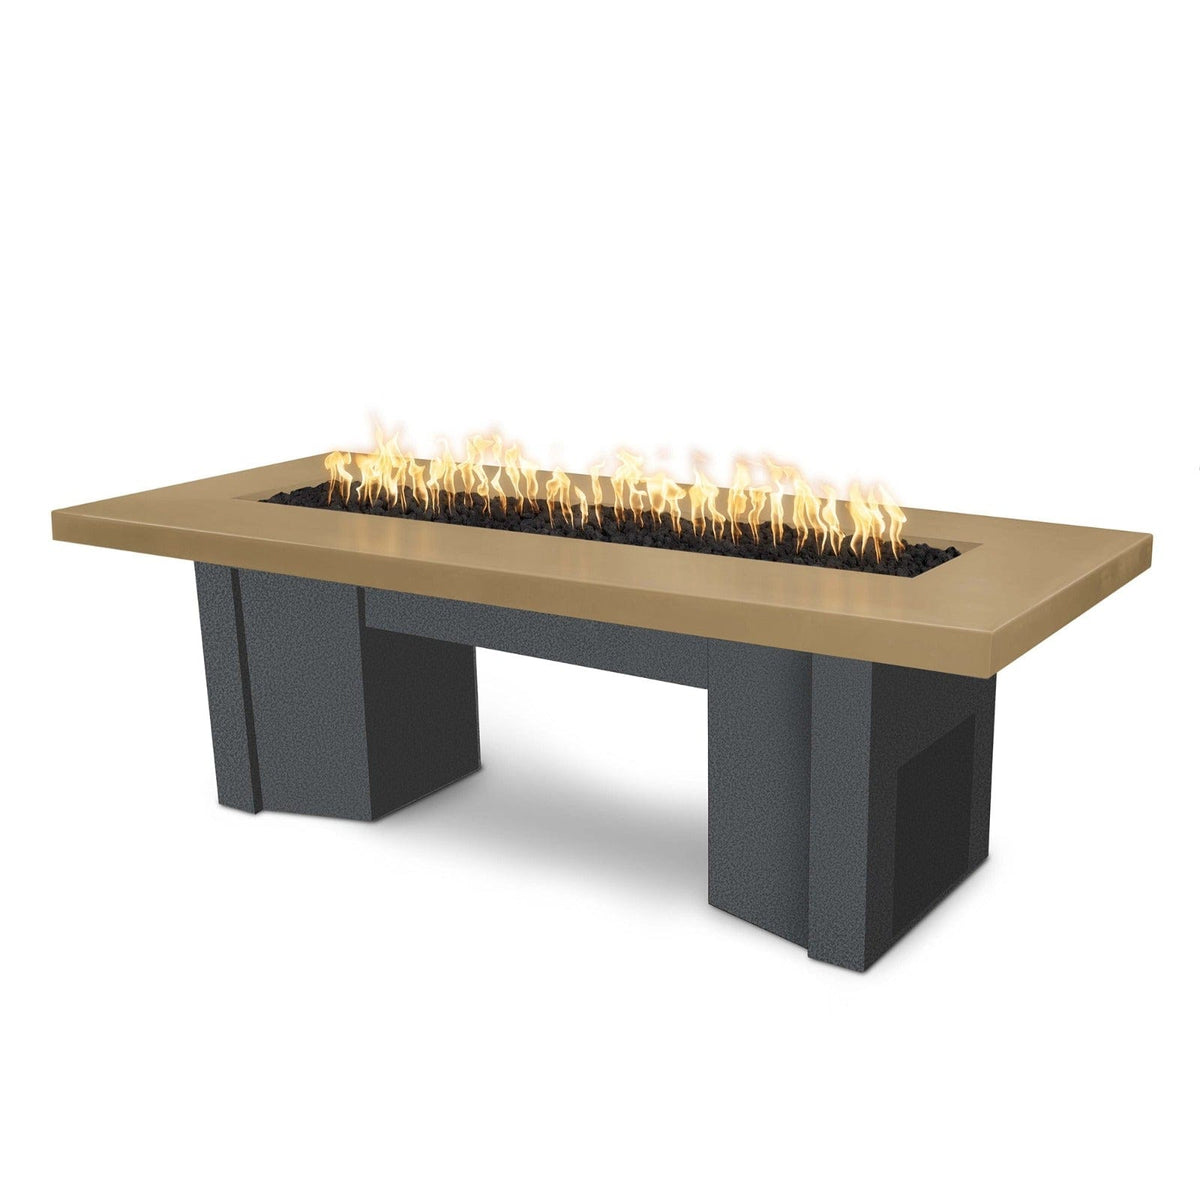 The Outdoor Plus Fire Features Brown (-BRN) / Silver Vein Powder Coated Steel (-SLV) The Outdoor Plus 78&quot; Alameda Fire Table Smooth Concrete in Liquid Propane - Match Lit / OPT-ALMGFRC78-LP